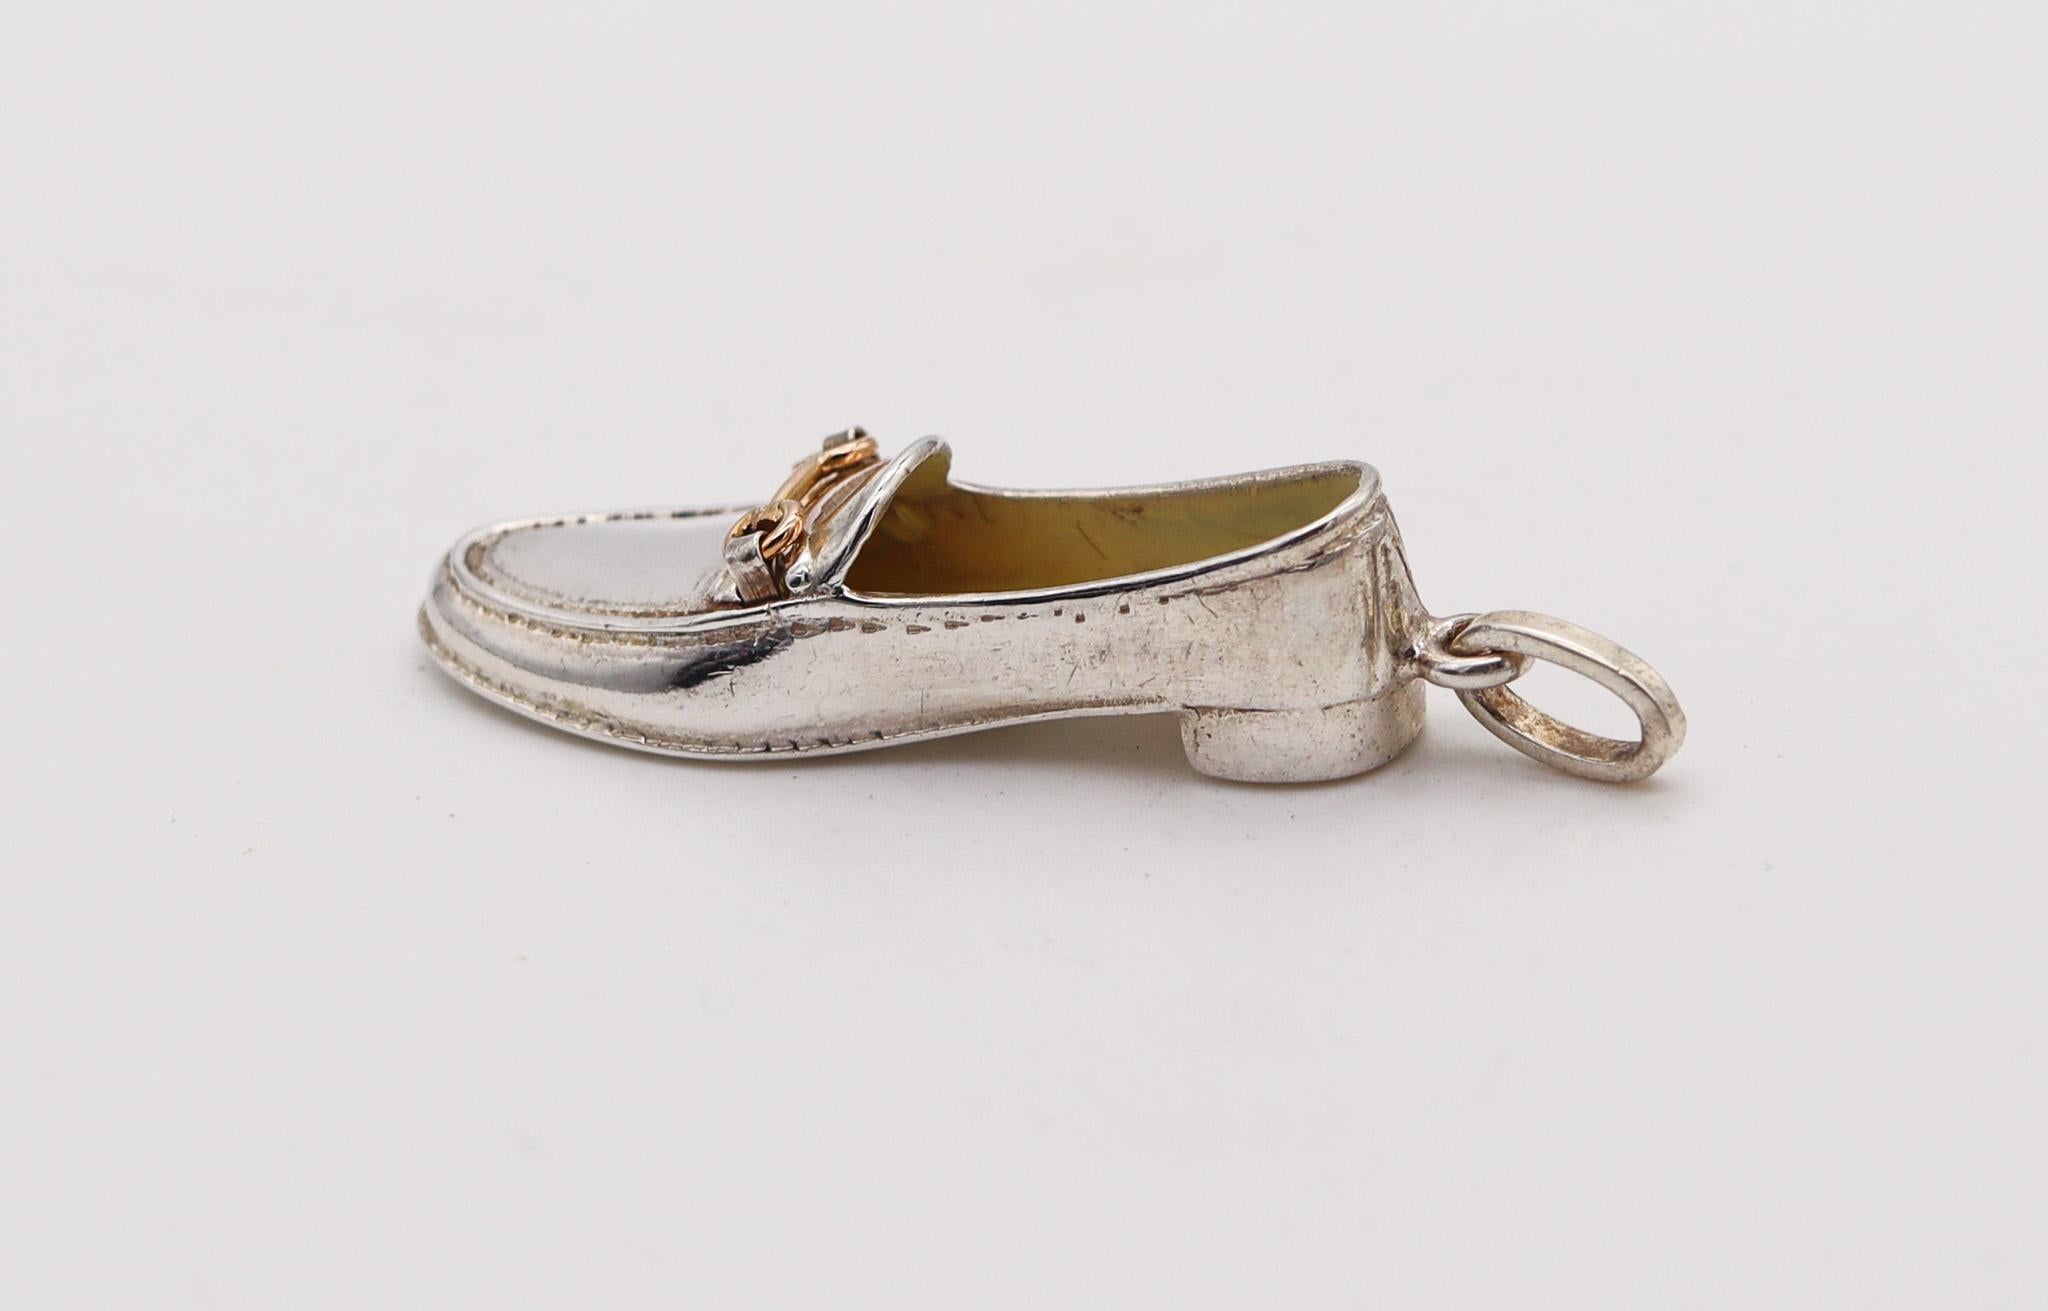 Pendant charm designed by Gucci.

Beautiful pendant-charm, created in Firenze Italy by the fashion house of Gucci, back in the 1980's. This pendant has been made as a miniature in the shape of the iconic loafers' shoes in solid .925/.999 sterling